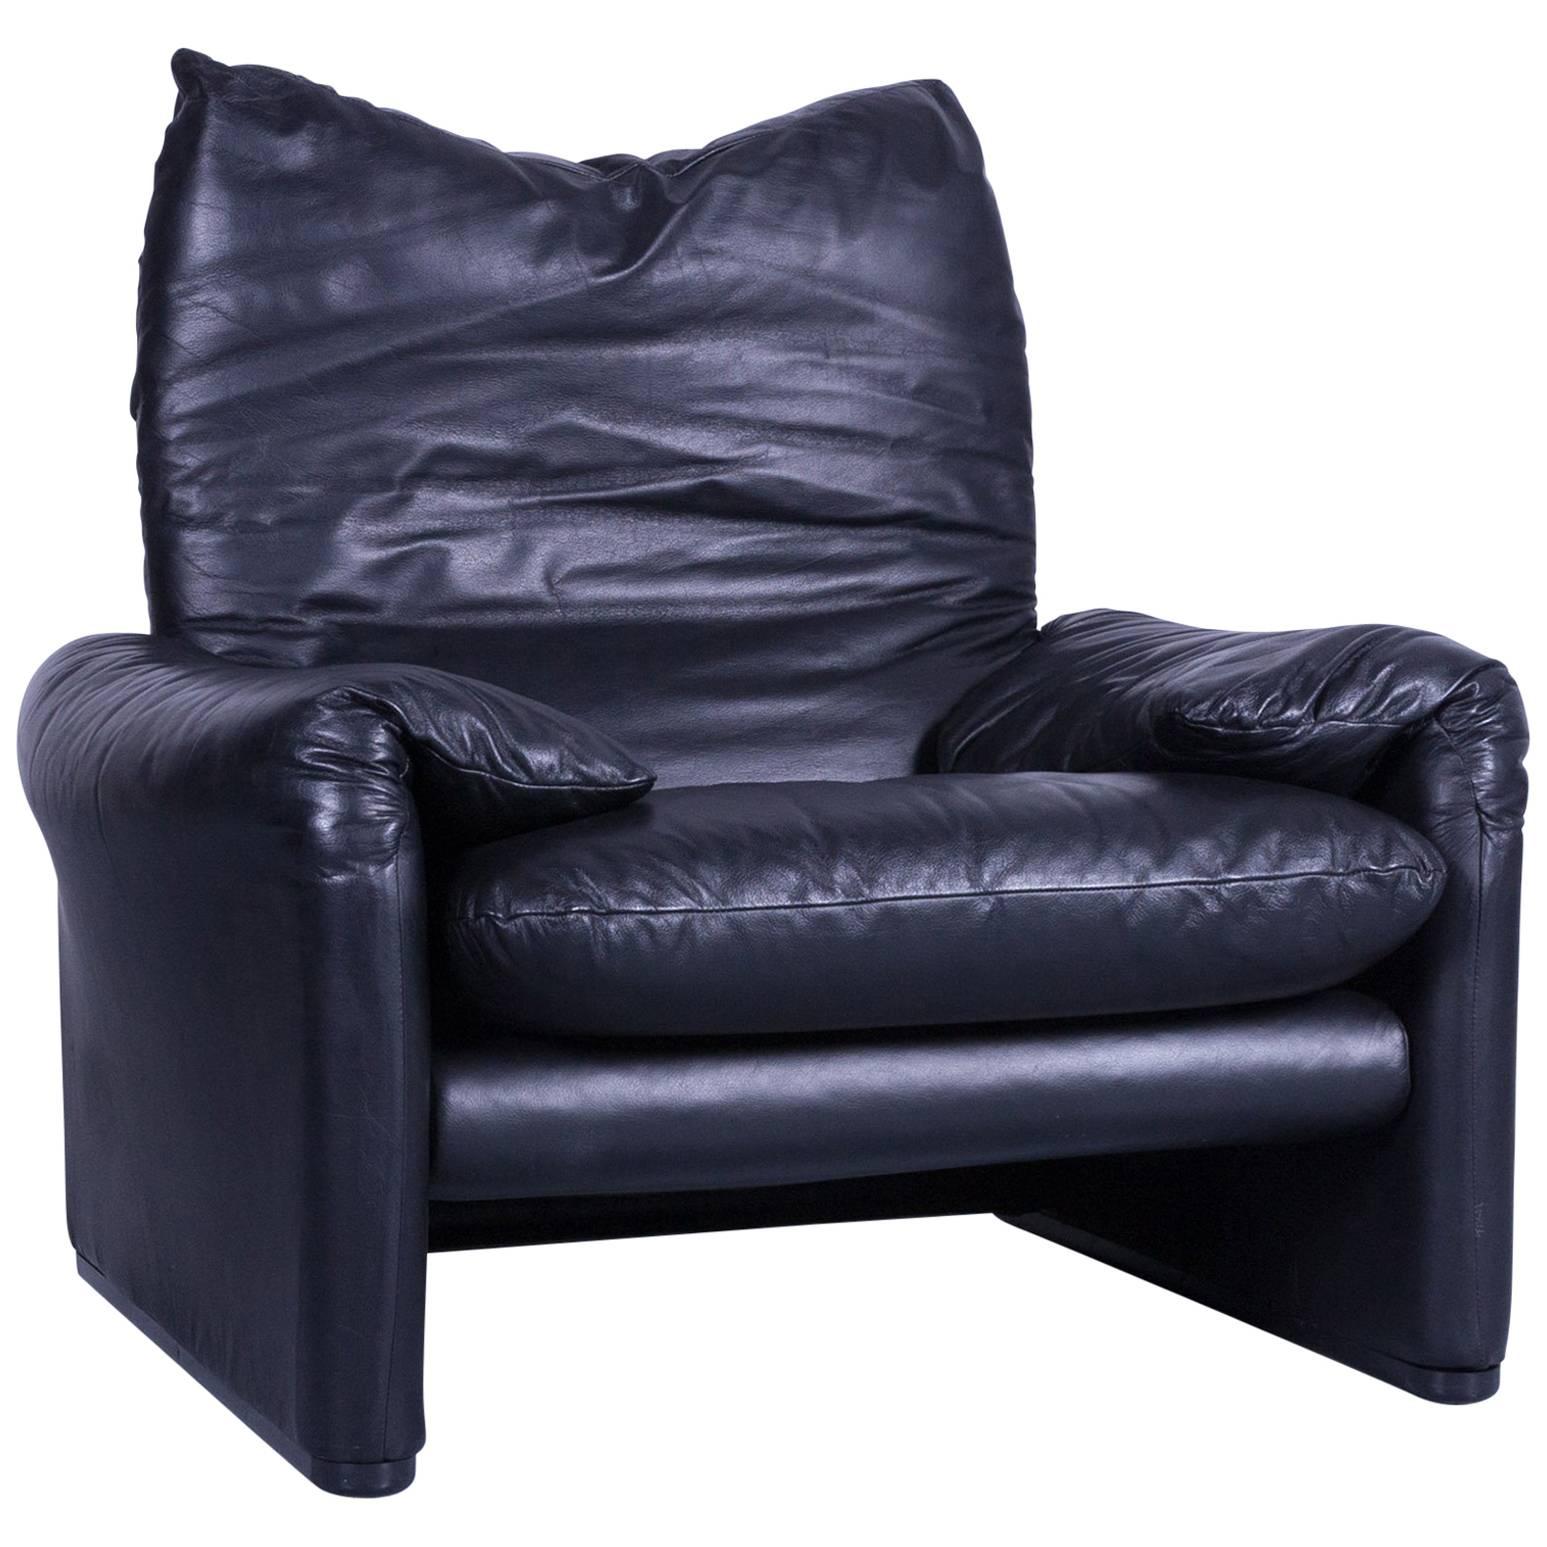 Cassina Maralunga Armchair Chair Leather Black One Seat Function